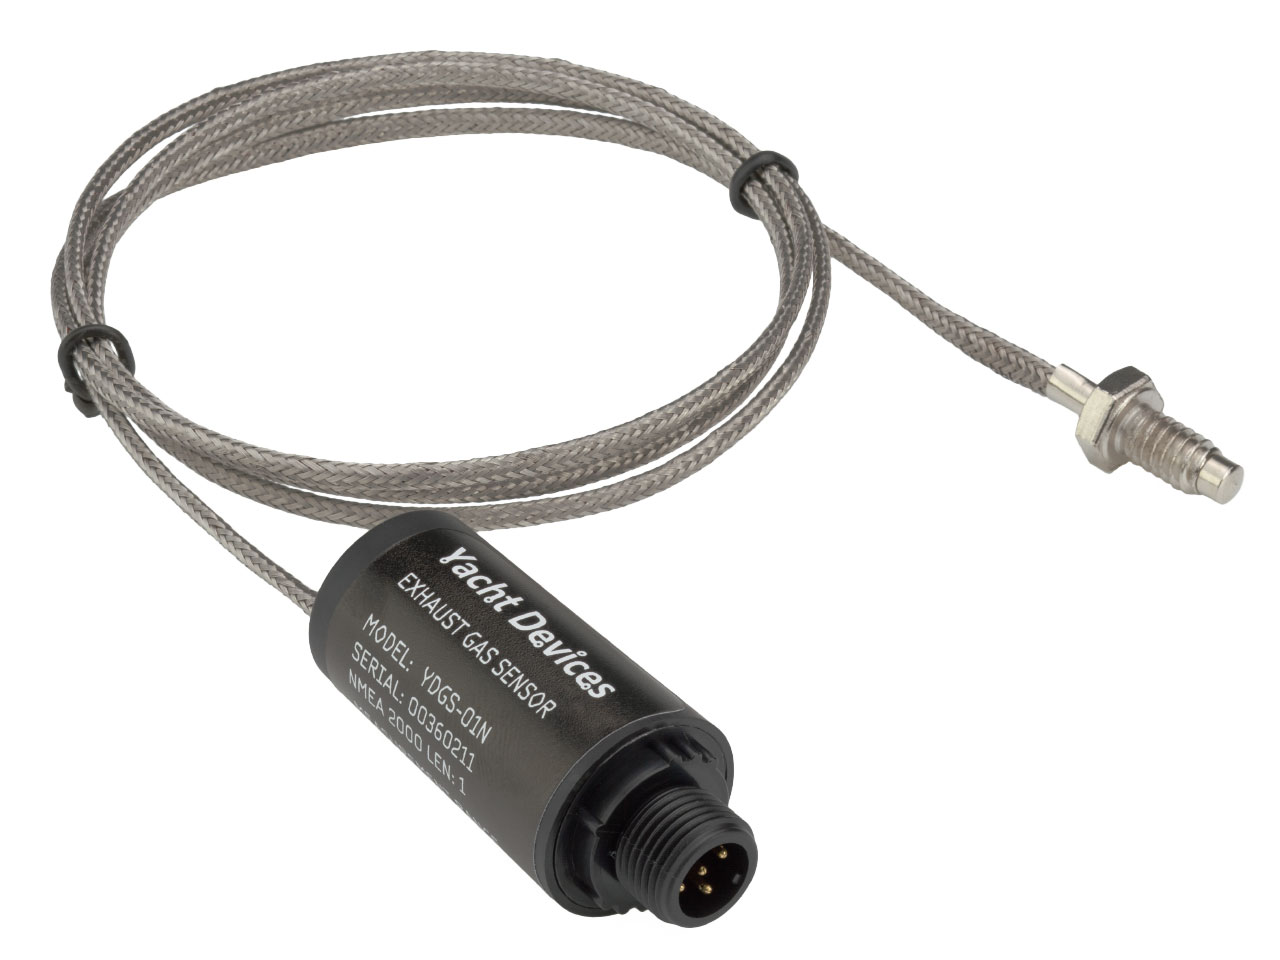 YDGS-01N model, with NMEA 2000 Micro Male connector